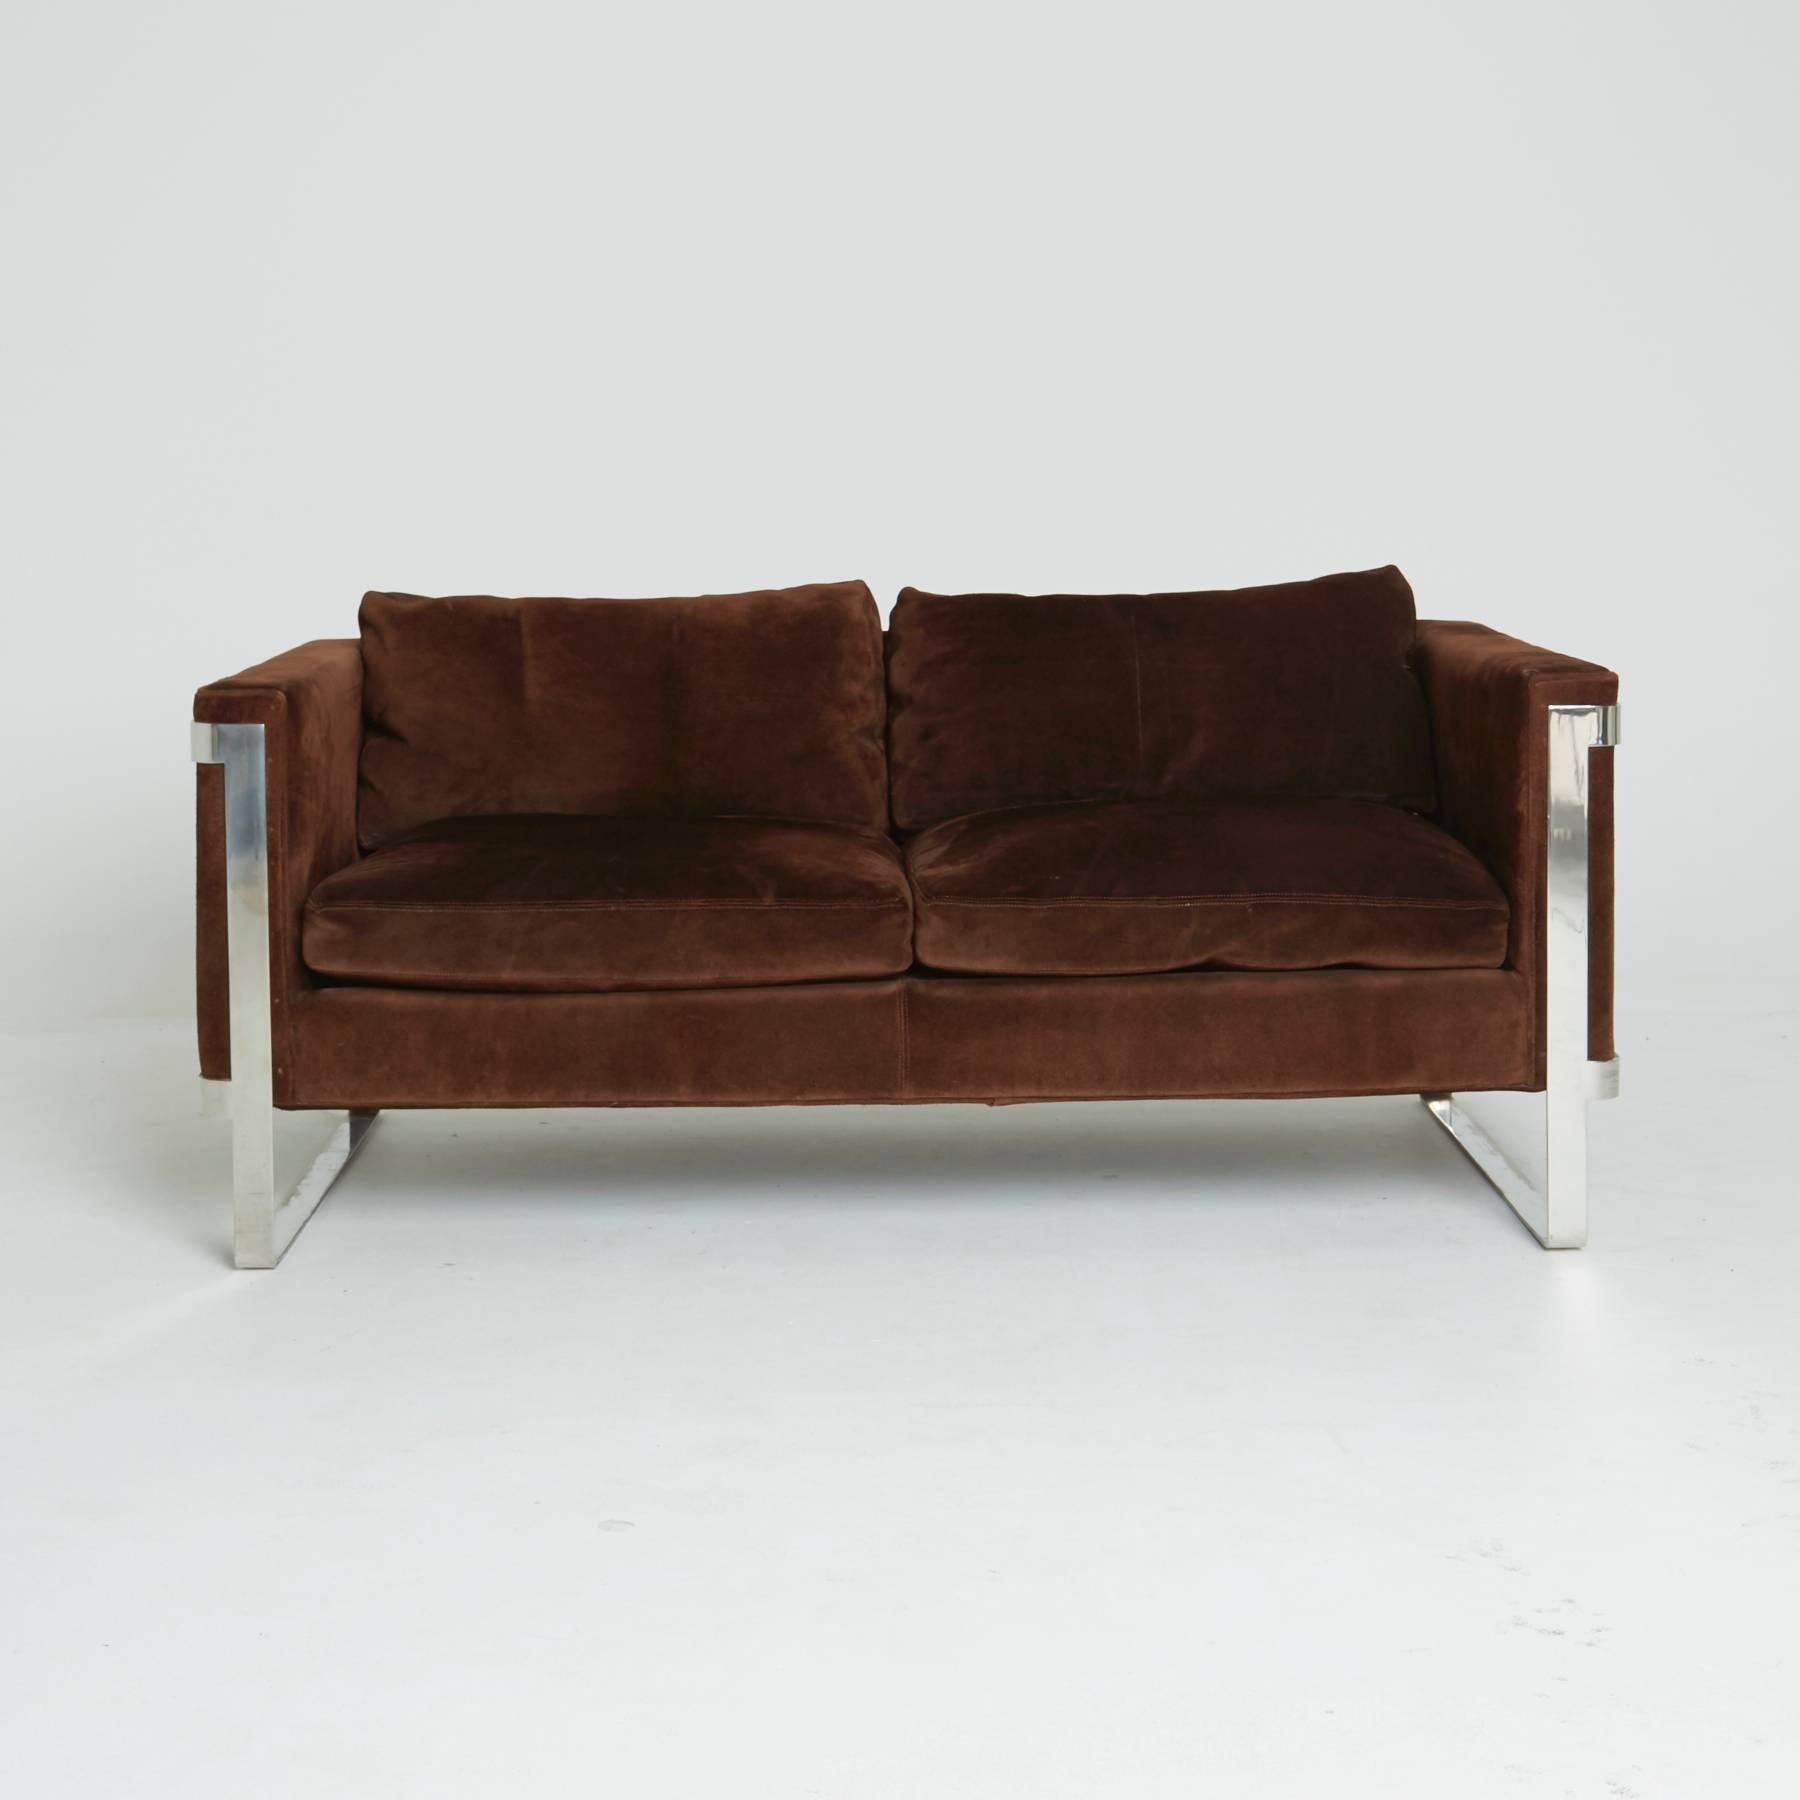 A two-seat settee with luxuriously rich brown suede upholstery that seems to float within the flat bar chrome frame that wraps around the edges. While this loveseat was created in the style of Milo Baughman, it also pays a very strong homage to the